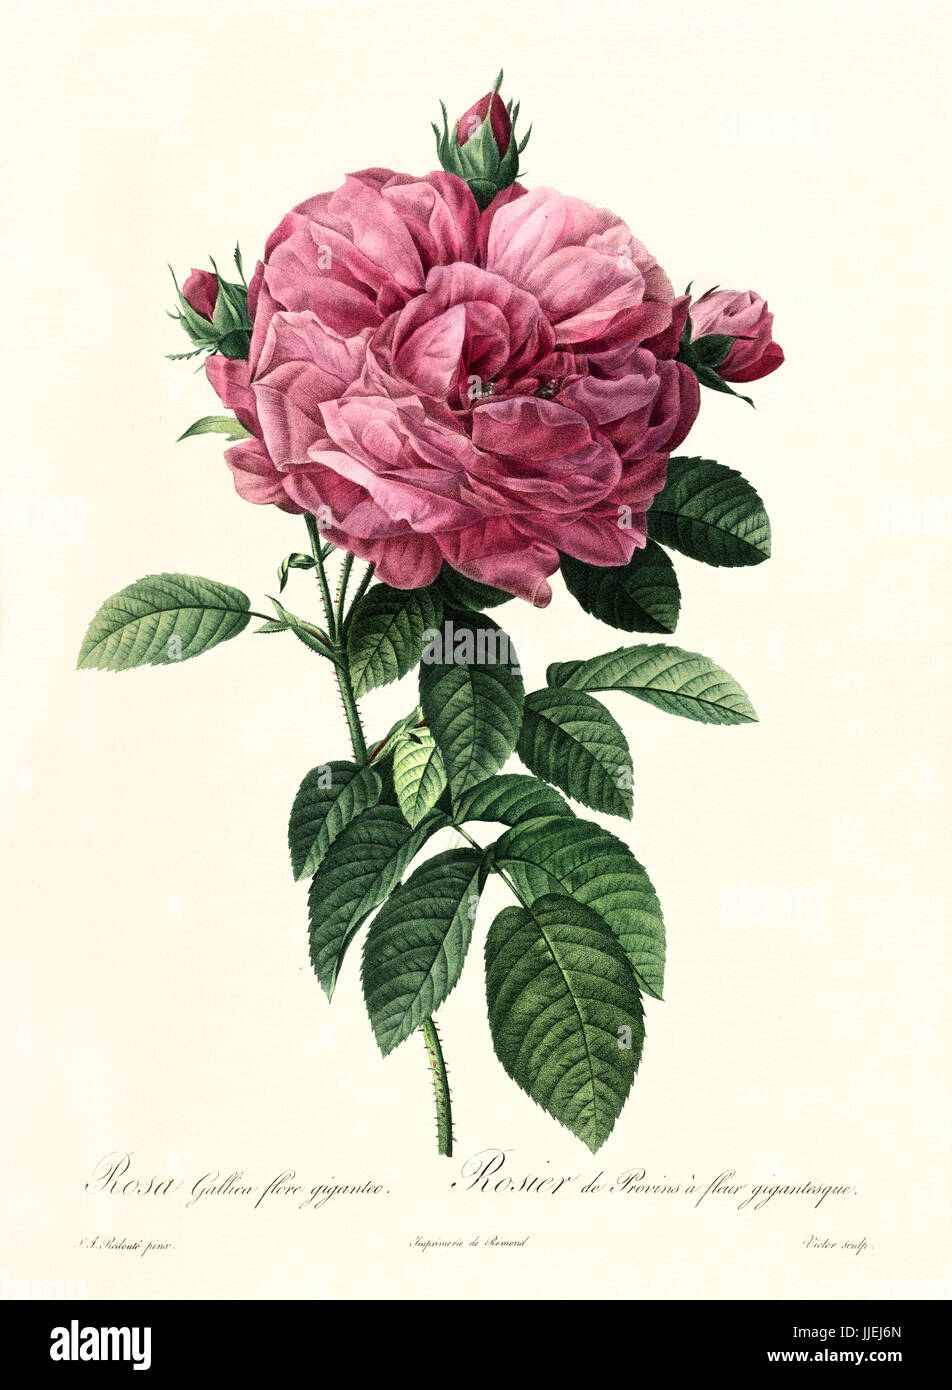 Old illustration of Rosa gallica flore giganteo. Created by P. R. Redoute, published on Les Roses, Imp. Firmin Didot, Paris, 1817-24 Stock Photo